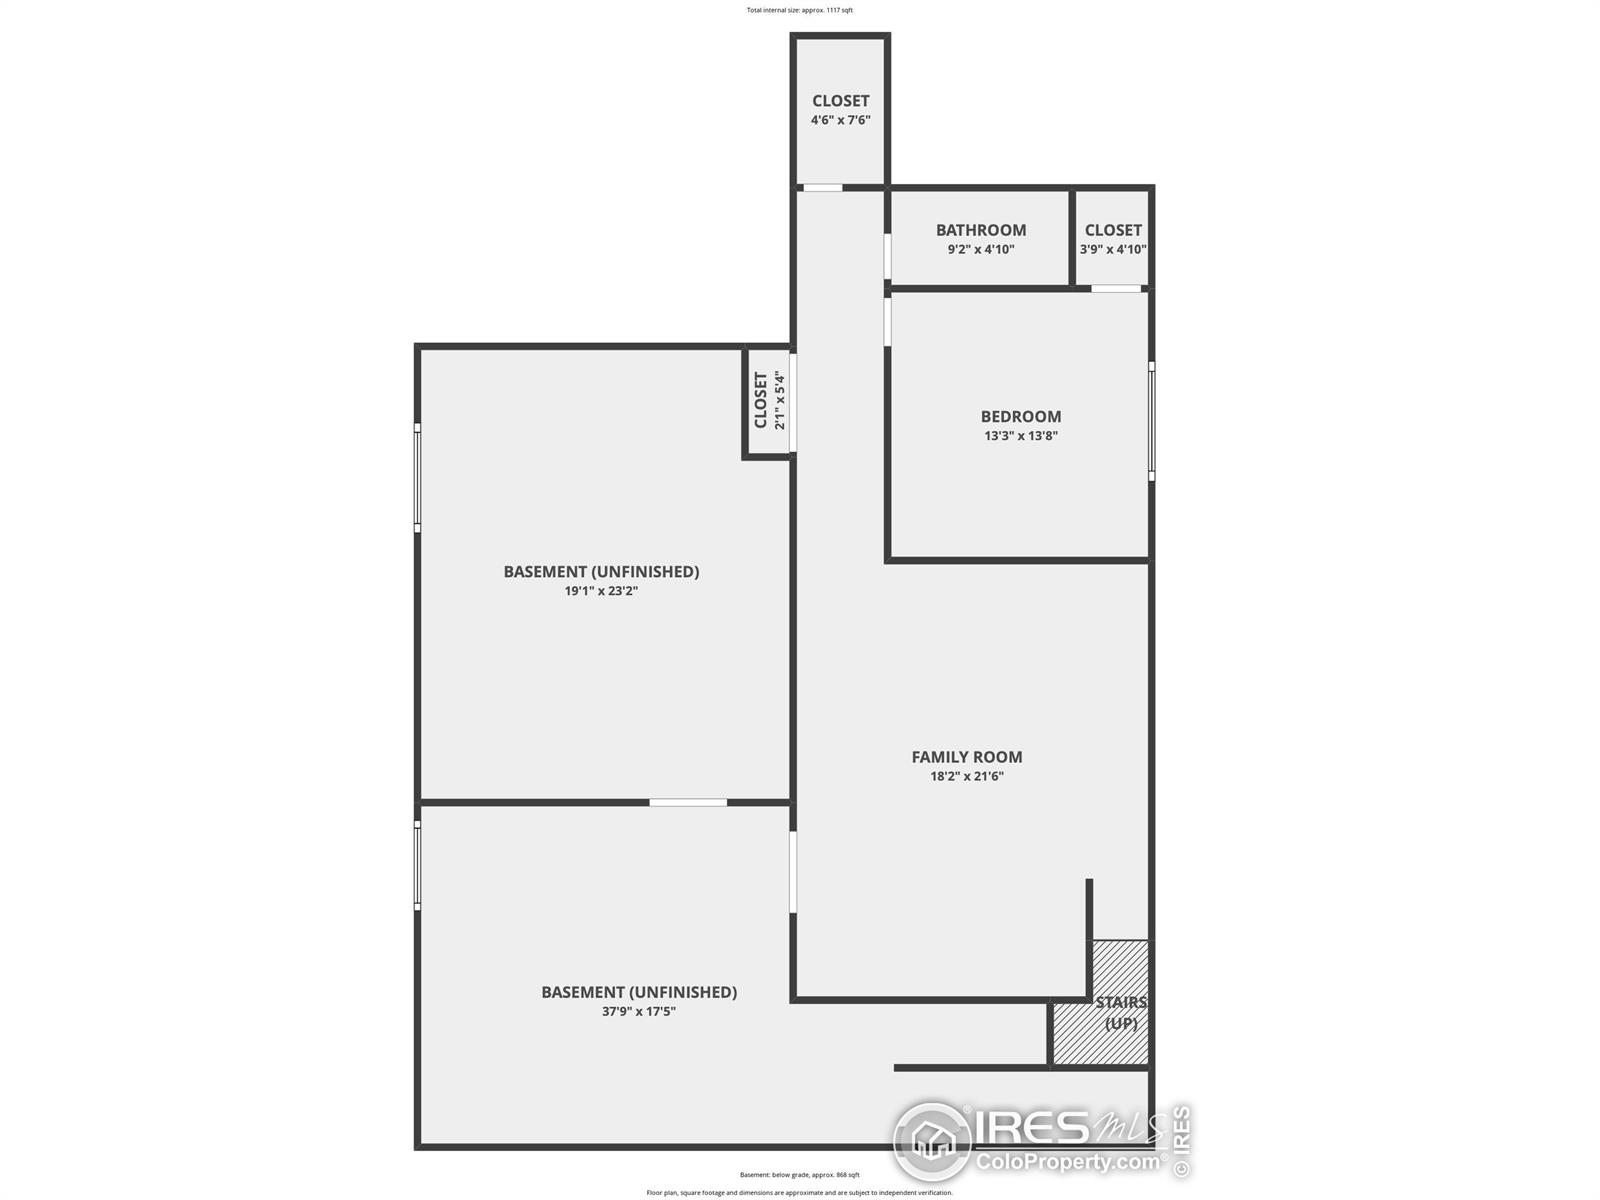 5560 97th, Westminster, CO